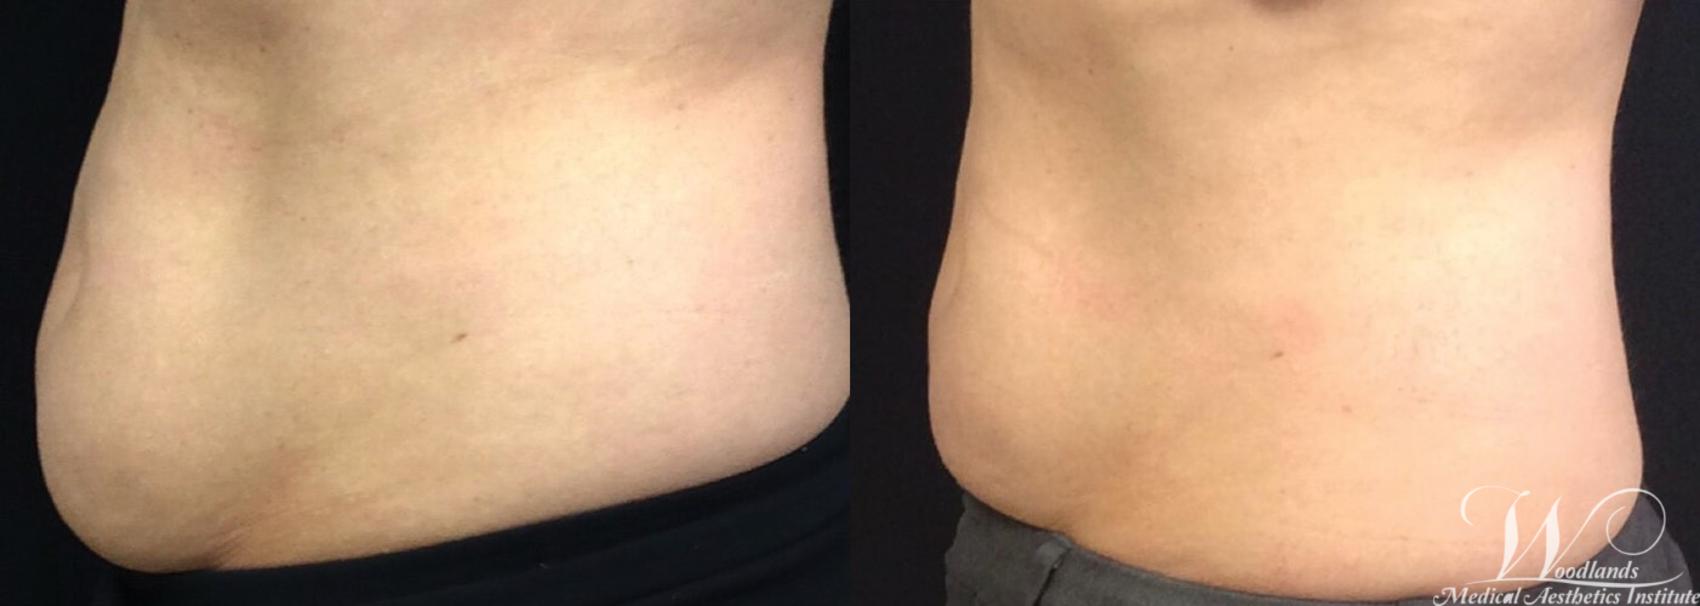 Before & After CoolSculpting® Case 5 Left Side View in The Woodlands, TX